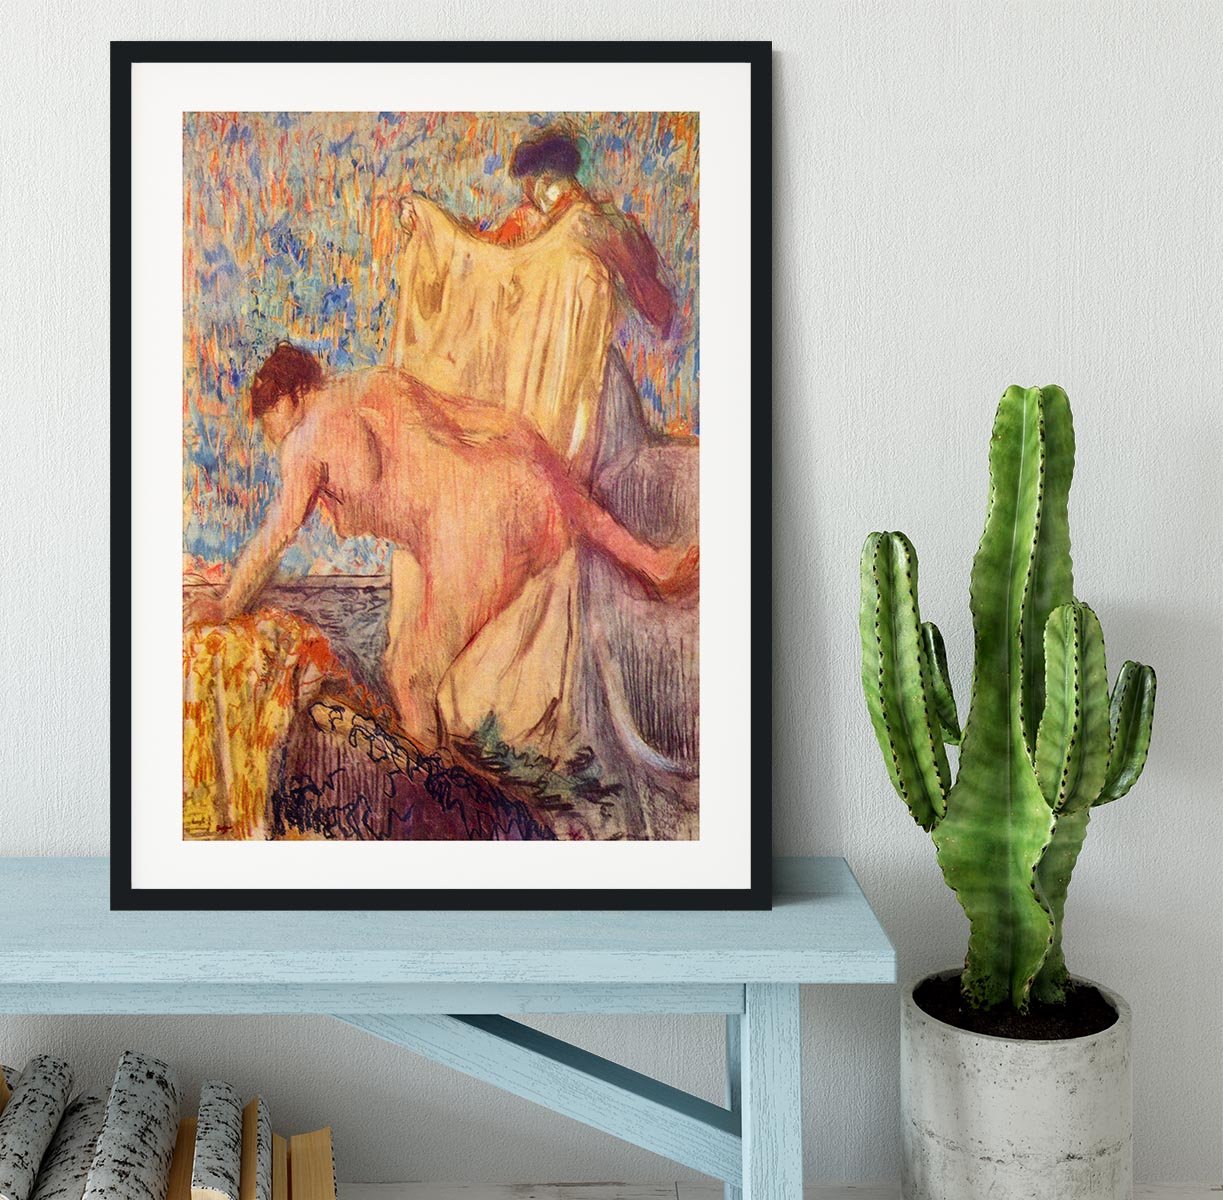 Withdrawing from the bathtub by Degas Framed Print - Canvas Art Rocks - 1